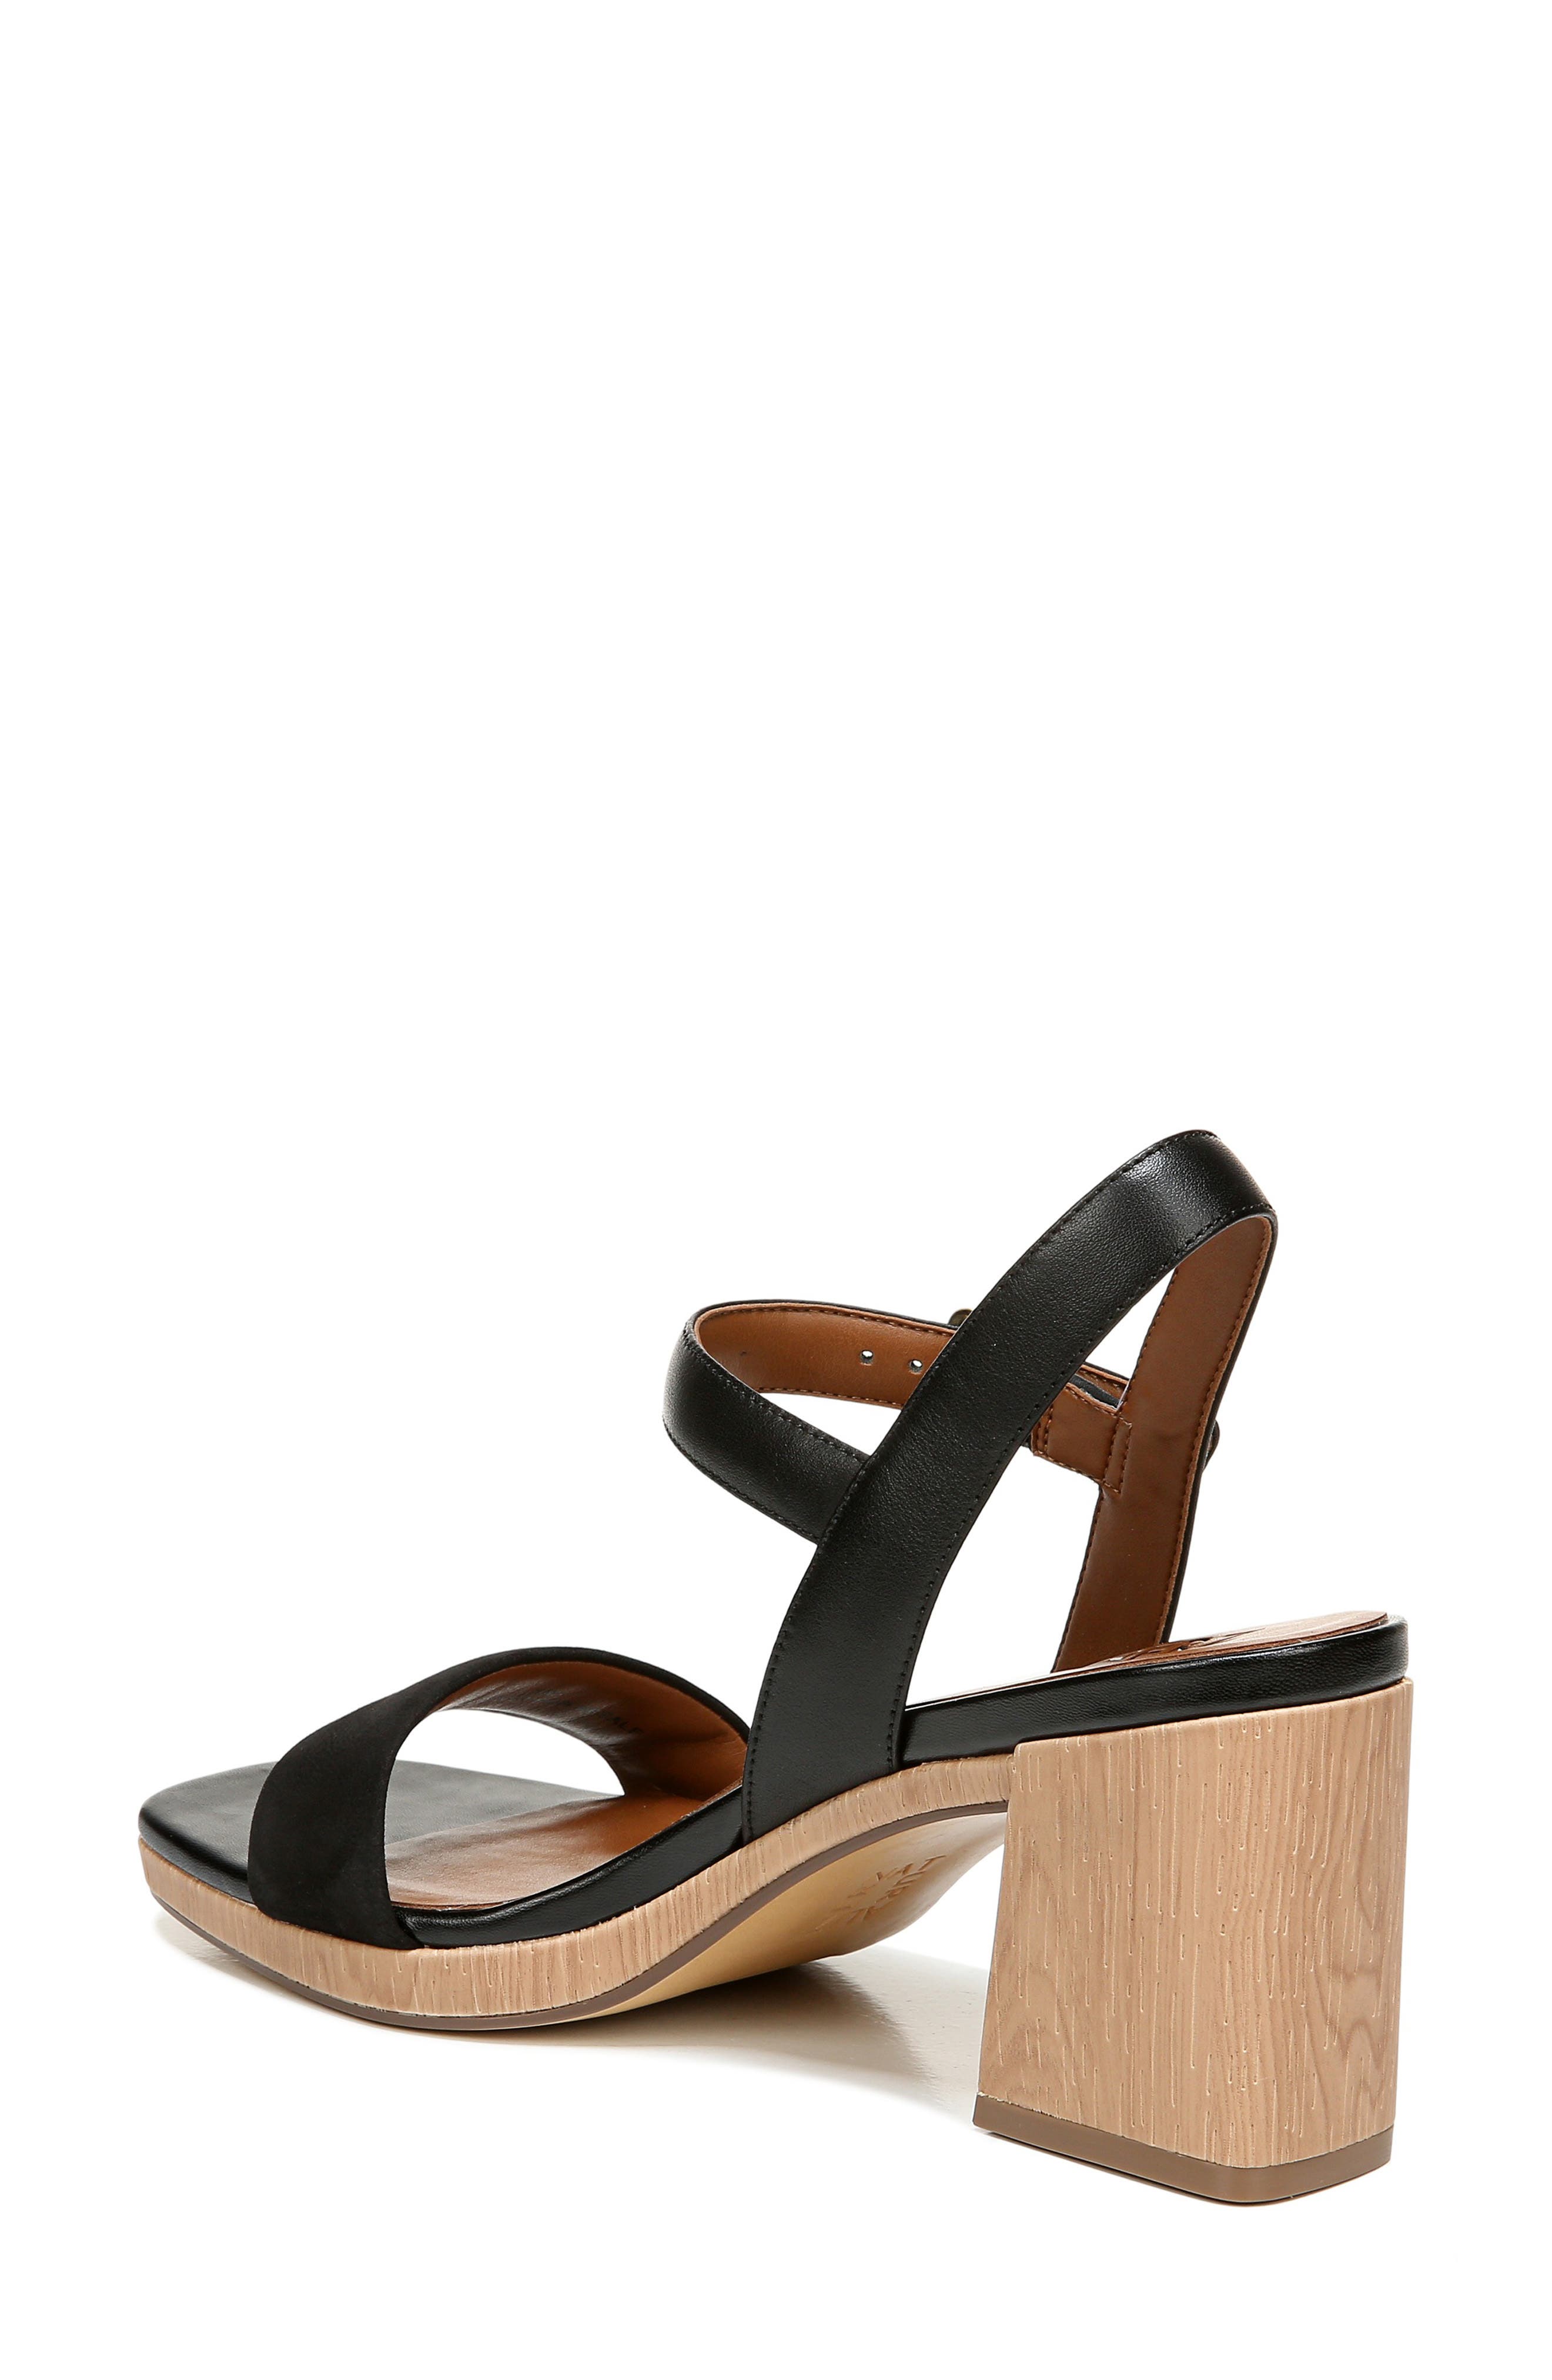 Details about   Naturalizer Taunt Saddle Tan or Rouge Leather Sandals 1/2" Heel 